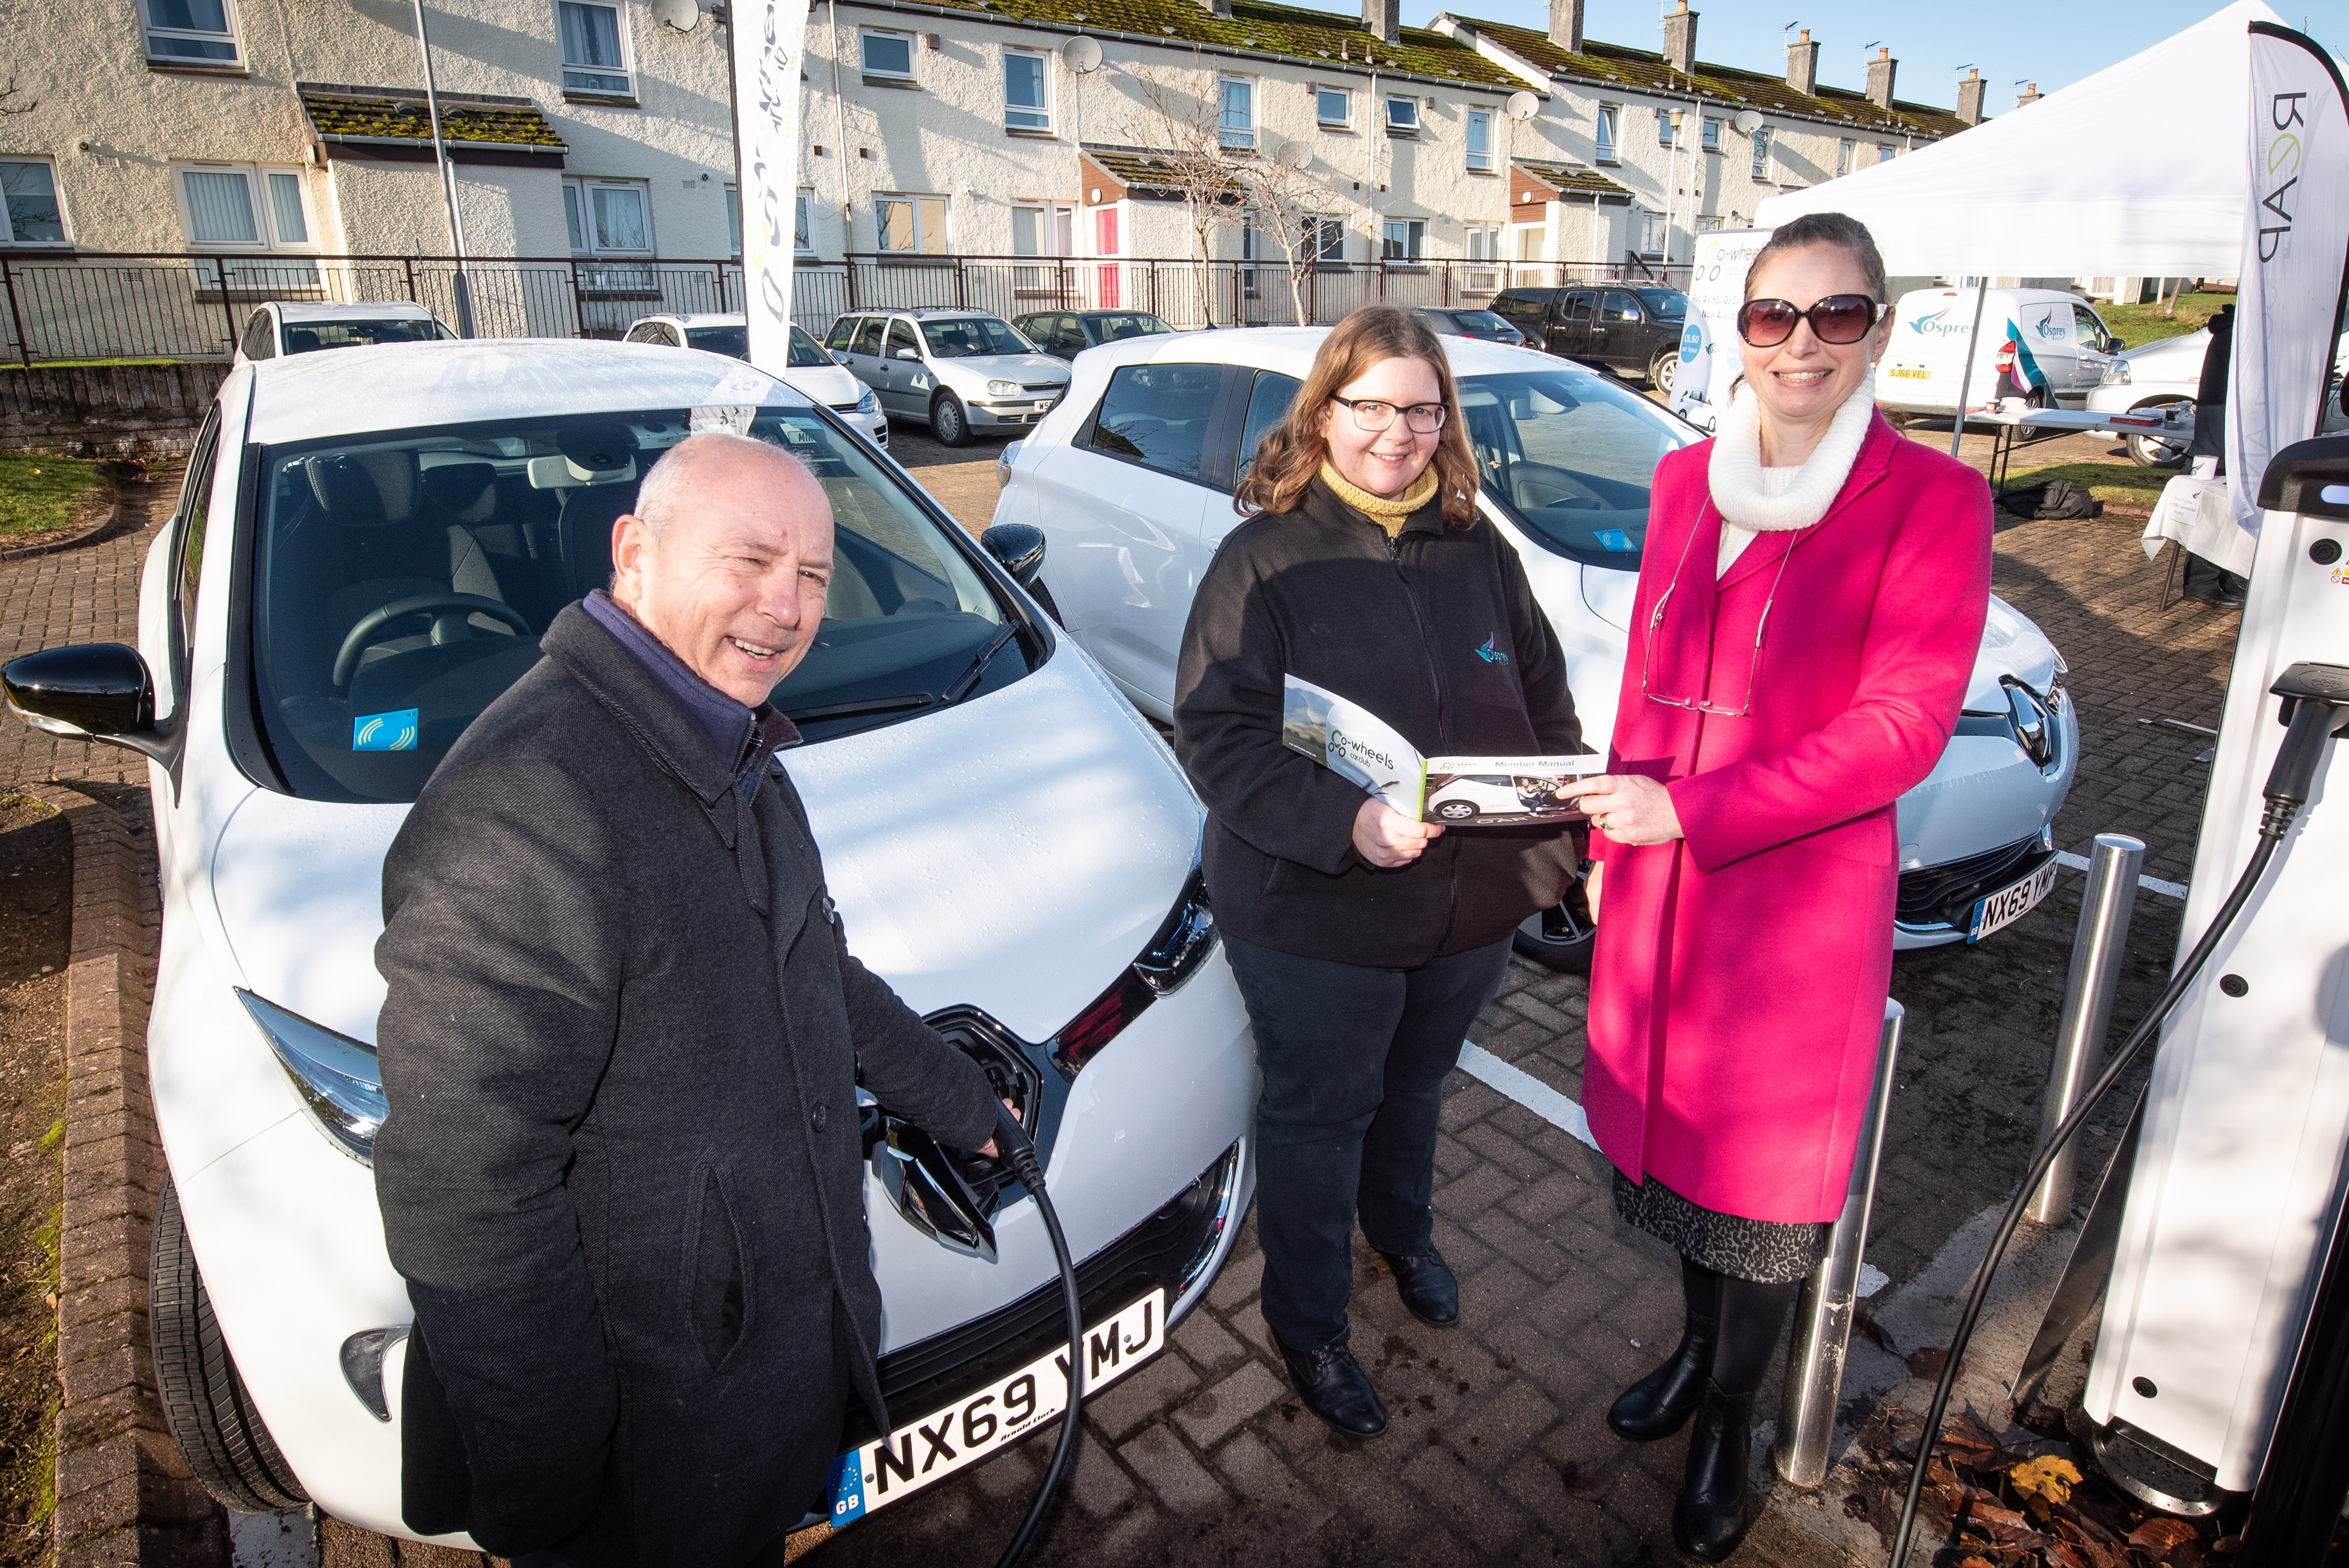 Jane McWhirr, pictured centre, Osprey Housing Group’s Sustainability Officer shows Osprey tenants David and Melanie Smith how the car club membership works.